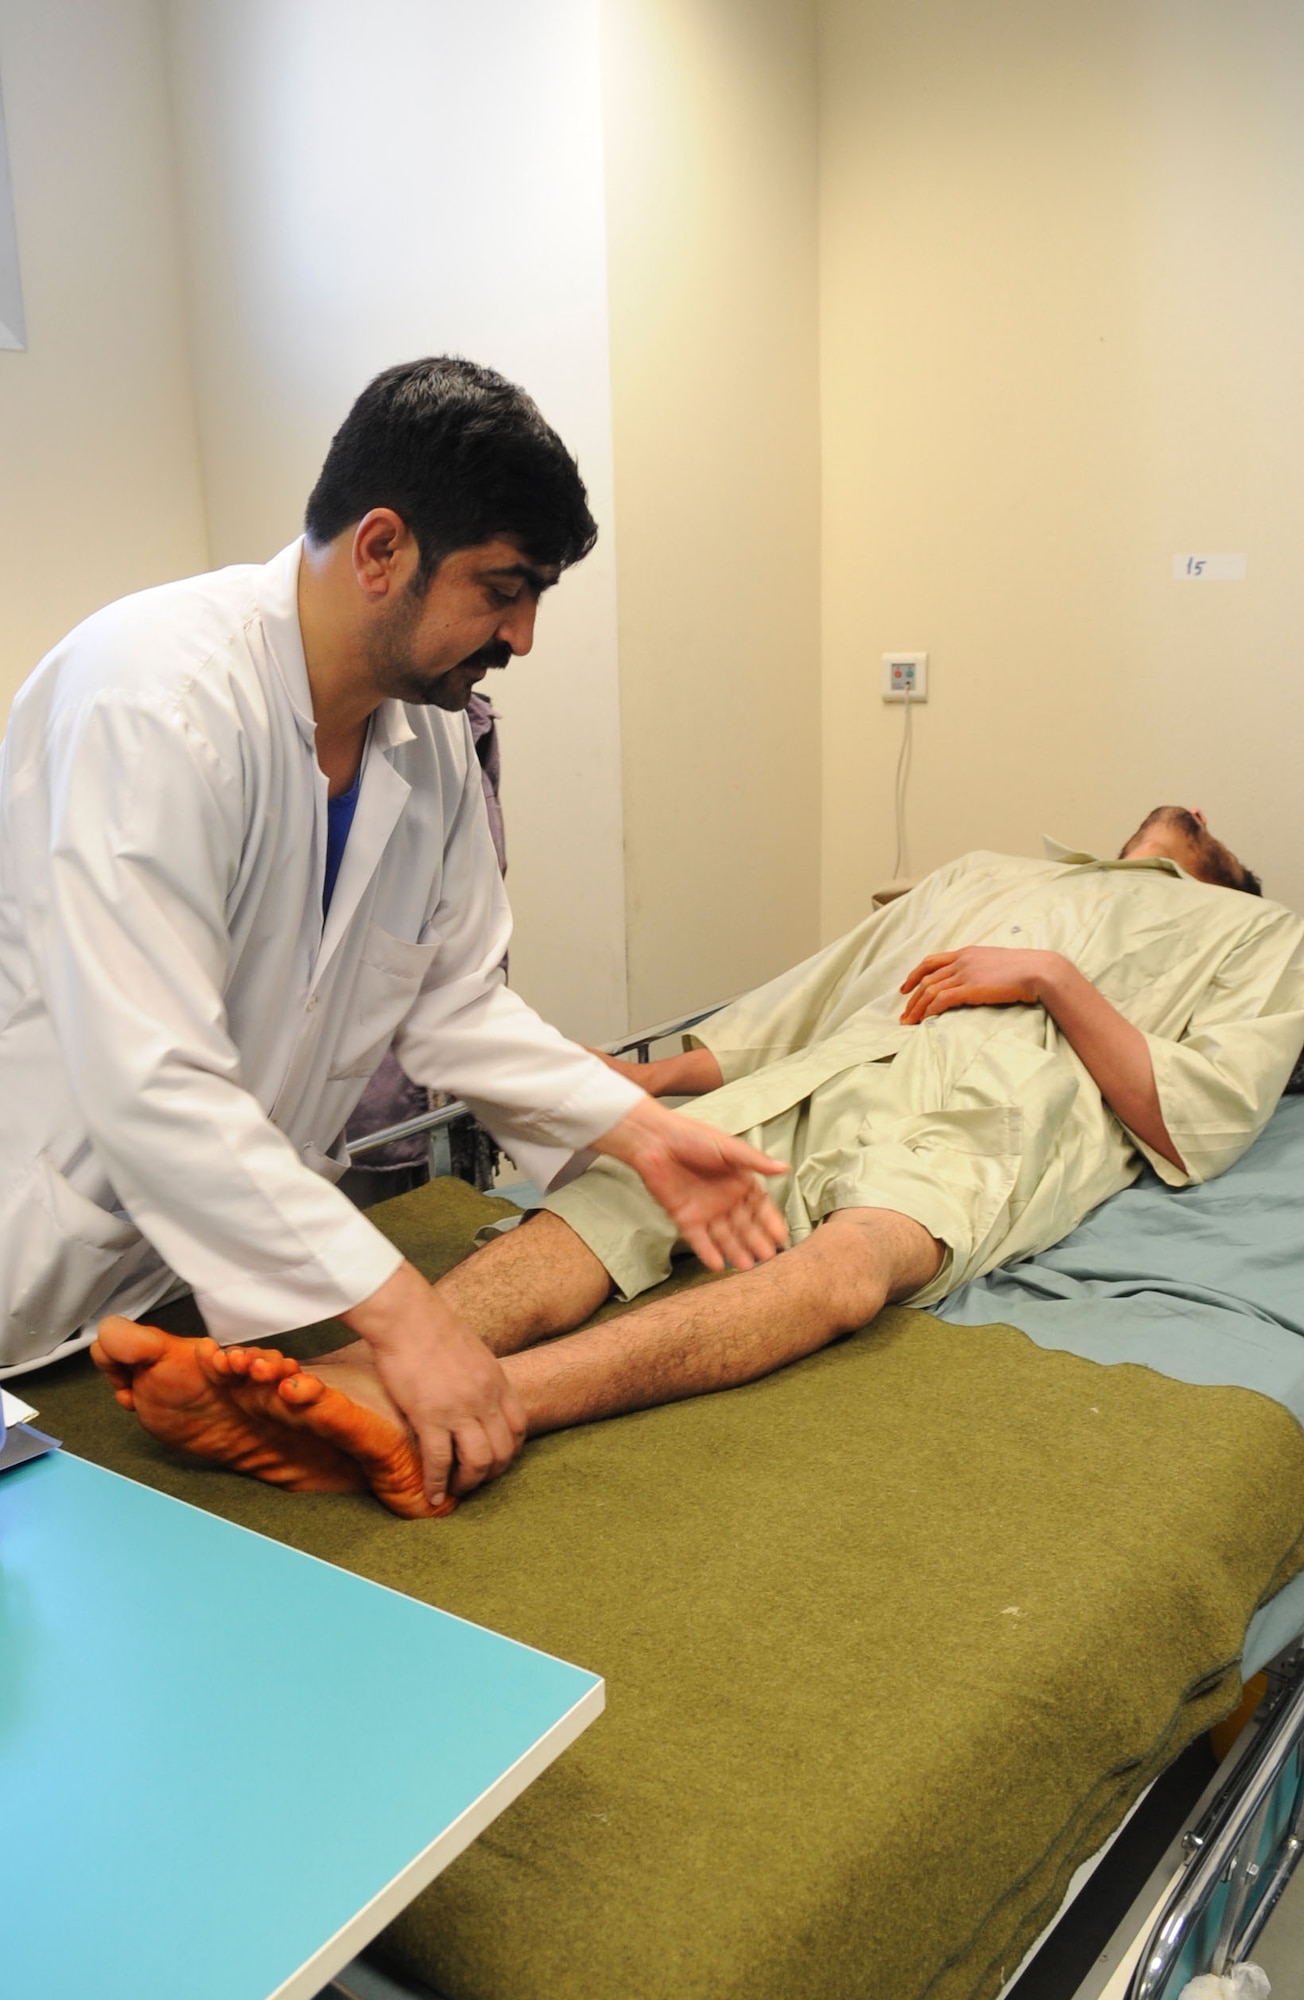 Dr. Shimwari, an Afghan orthopedic doctor at the Kandahar Regional Military Hospital, examines the leg of a patient who had a gunshot wound to his distal thigh during the spring of 2009. The doctor, described as the best Afghan National Army orthopedic doctor, plans to perform an operation on the patient to fix his deformed and shortened leg. (U.S. Air Force photo/Senior Airman Nancy Hooks/Released) 